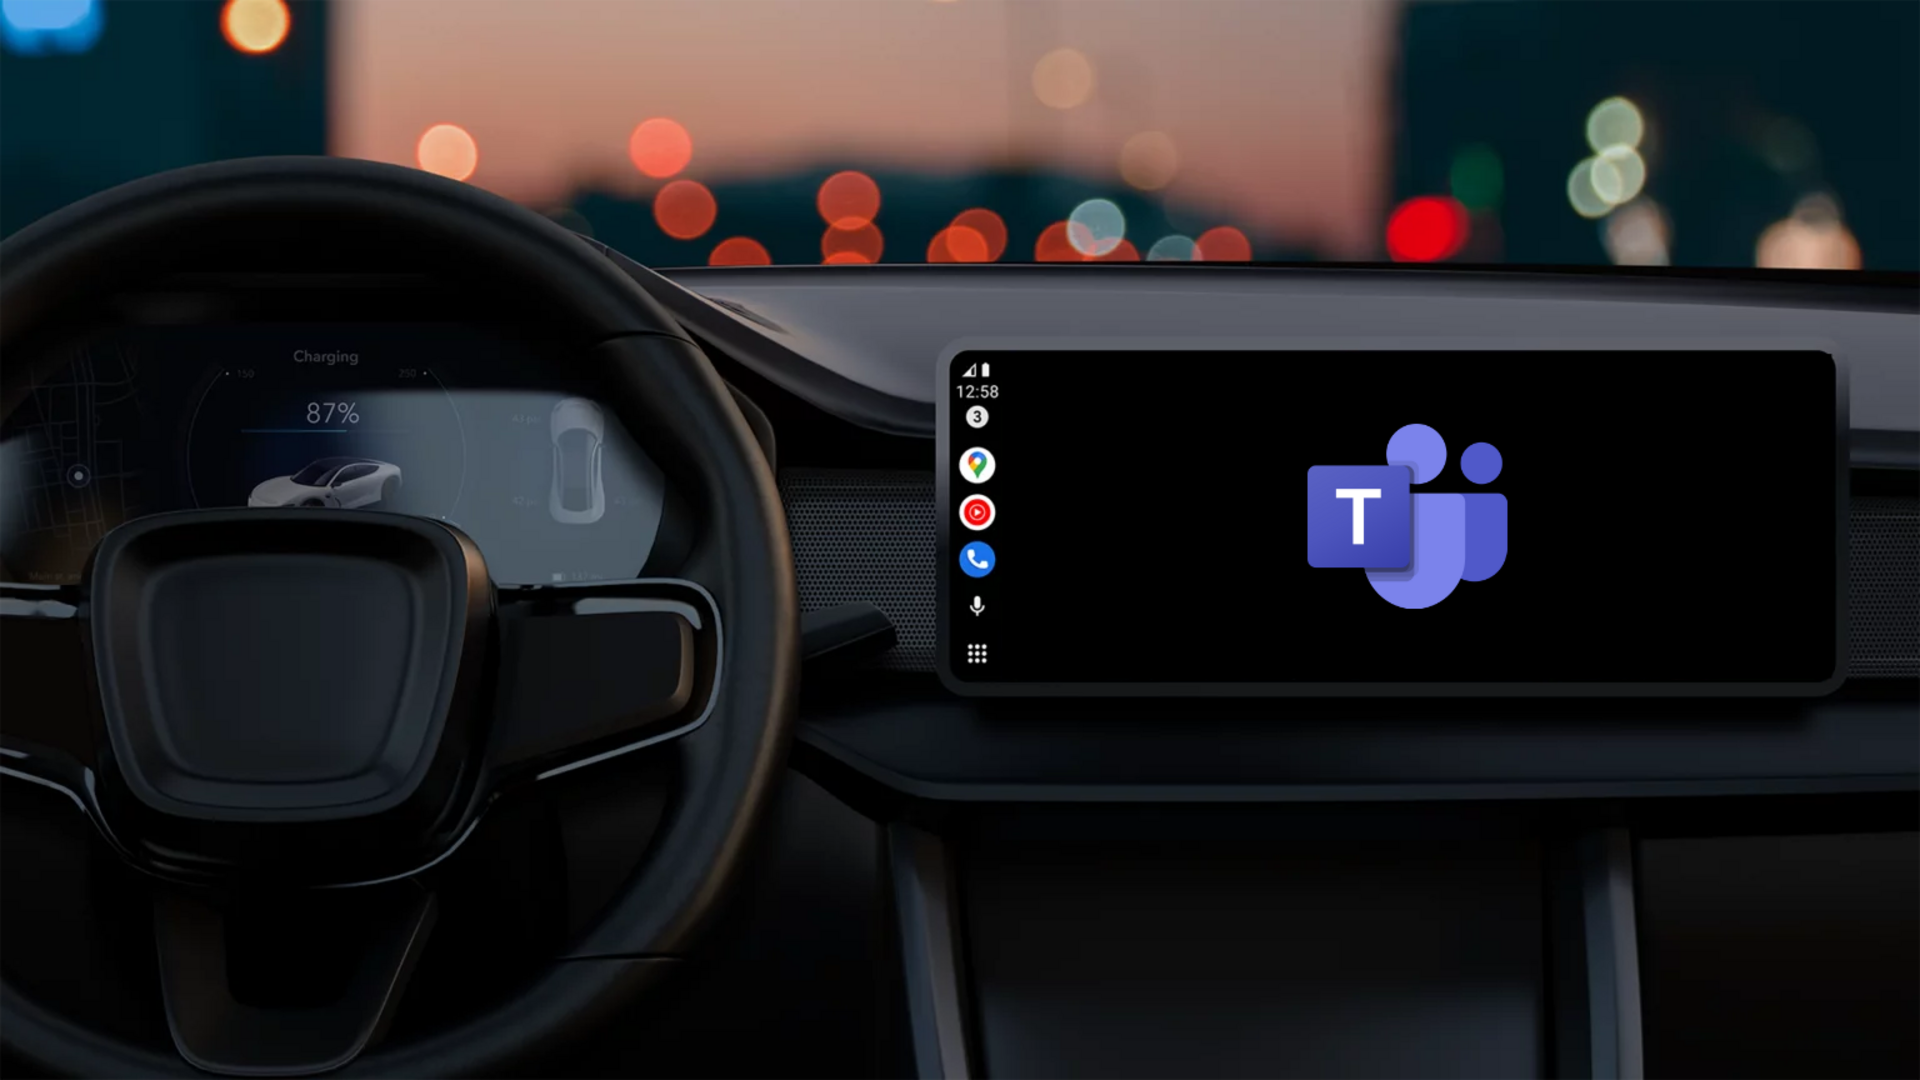 Microsoft Teams to arrive on Android Auto next month